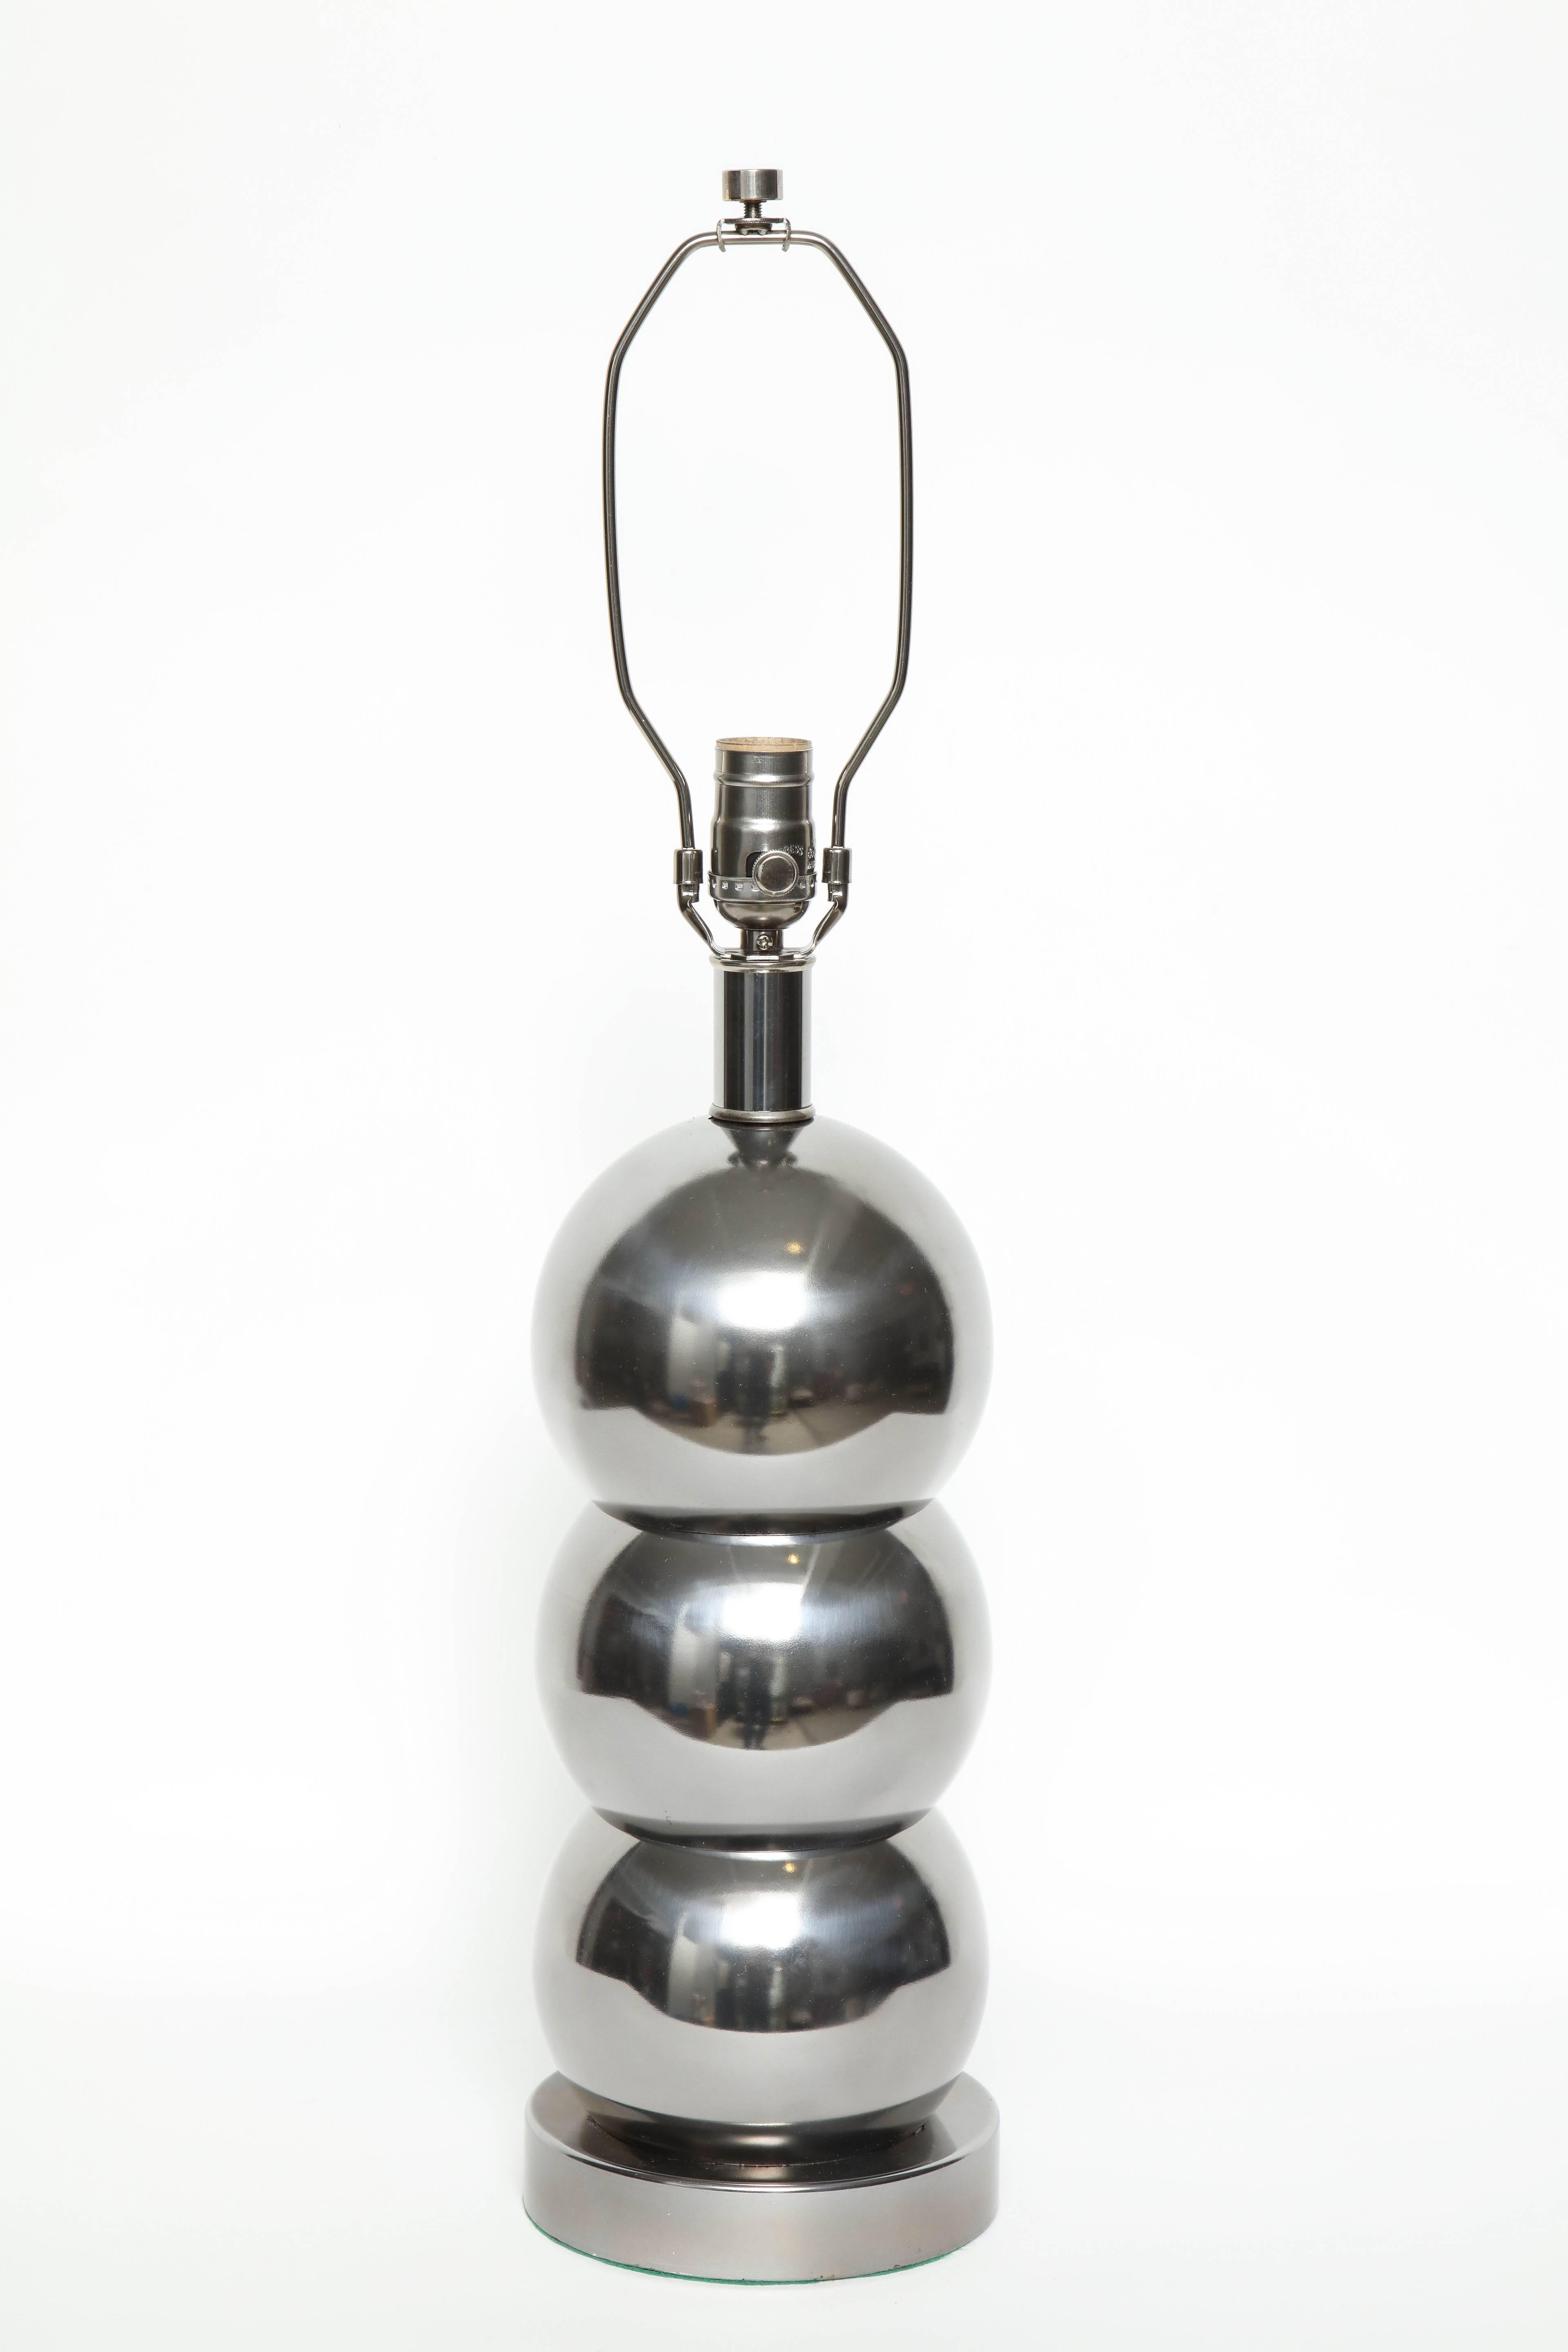 Pair of chic 1970s stacked steel ball lamps in a custom gunmetal finish. Rewired for use in the USA. Shades not included.